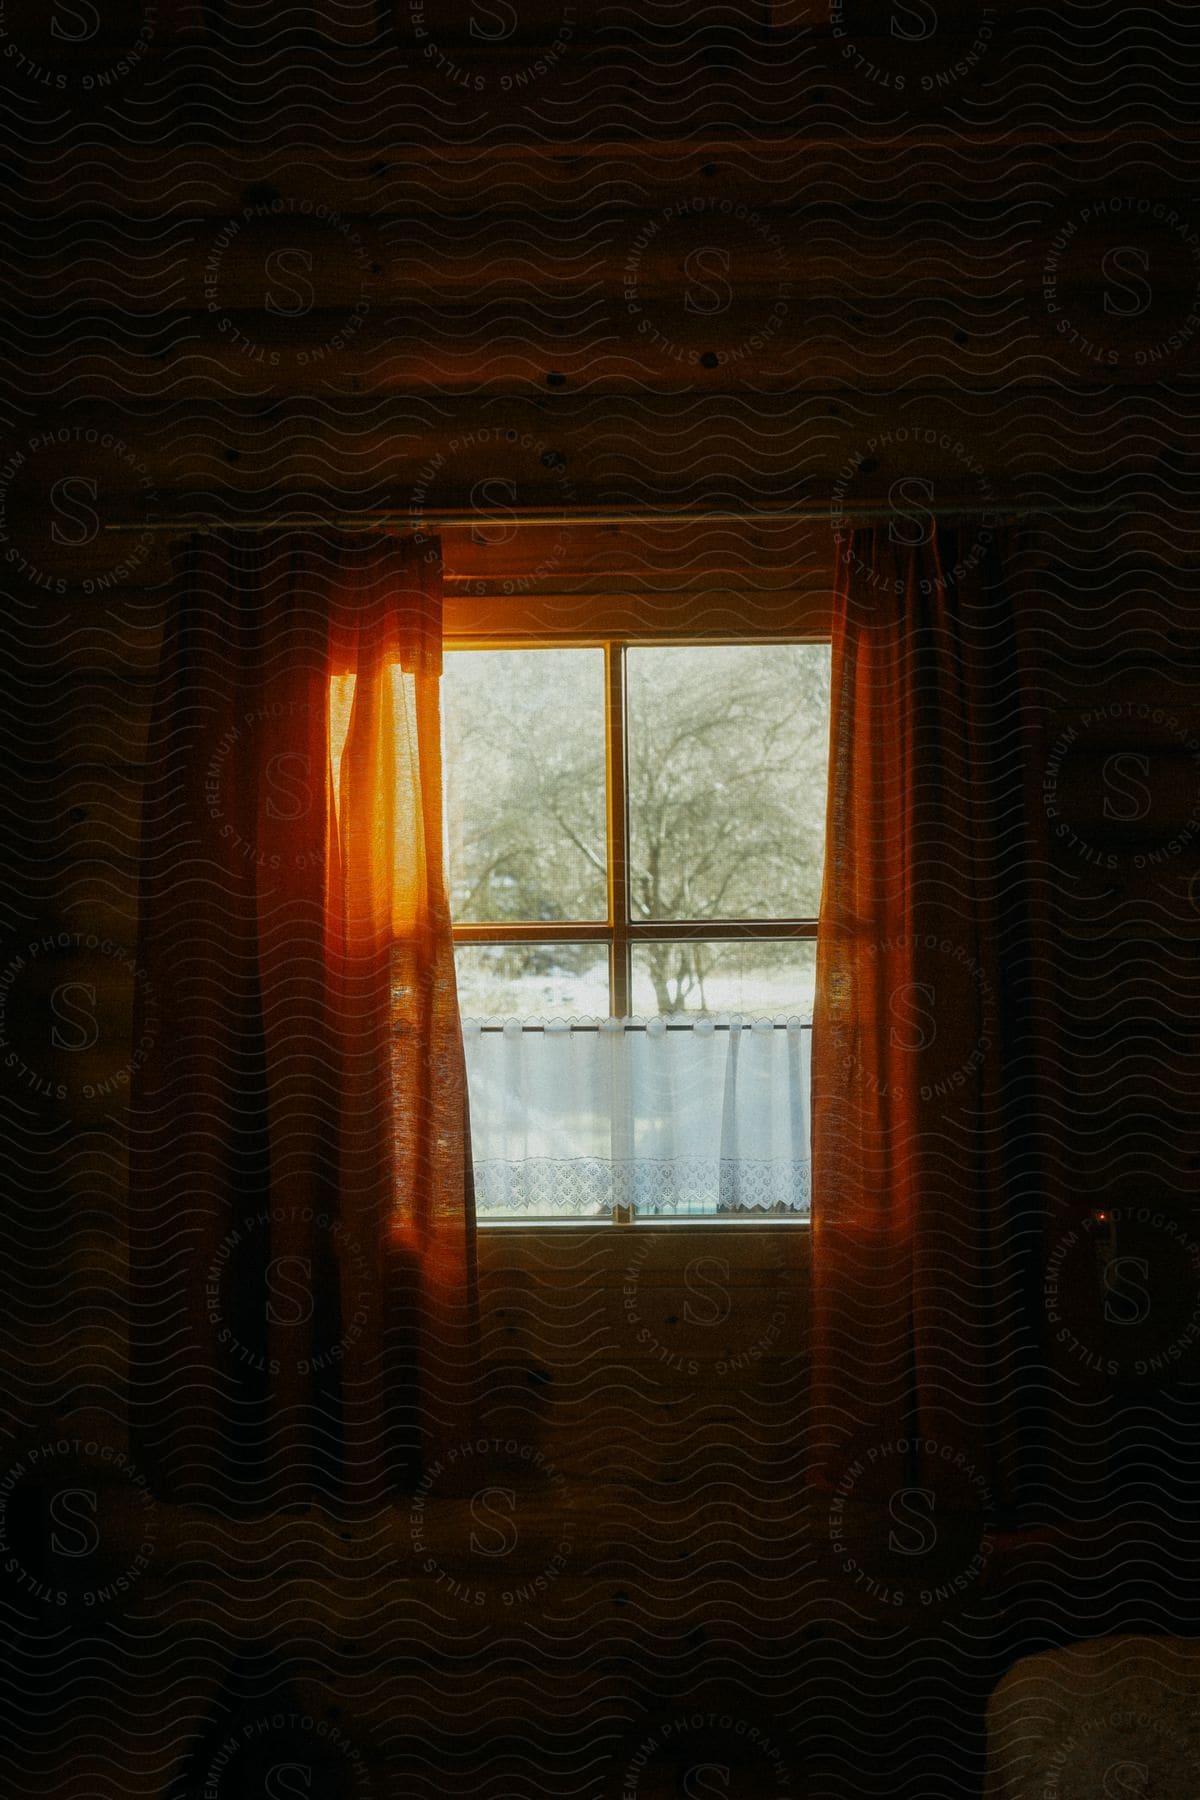 Interior of a wooden house with a view of a window with an open curtain and reflection of sunlight.